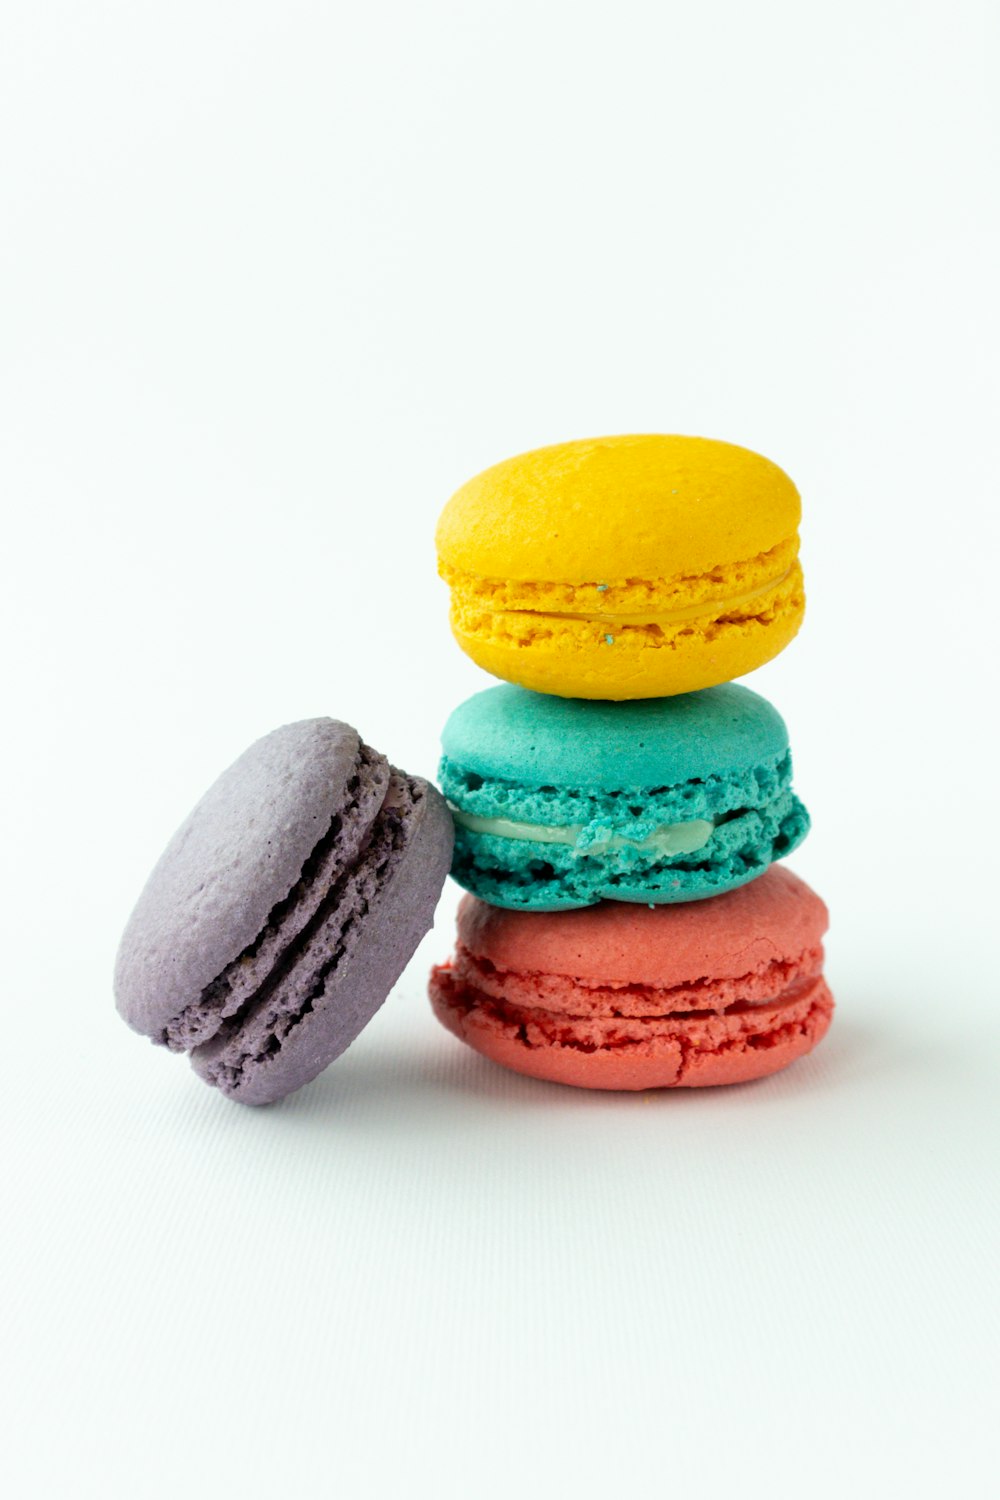 3 yellow pink and green macaroons photo – Free Sweets Image on Unsplash